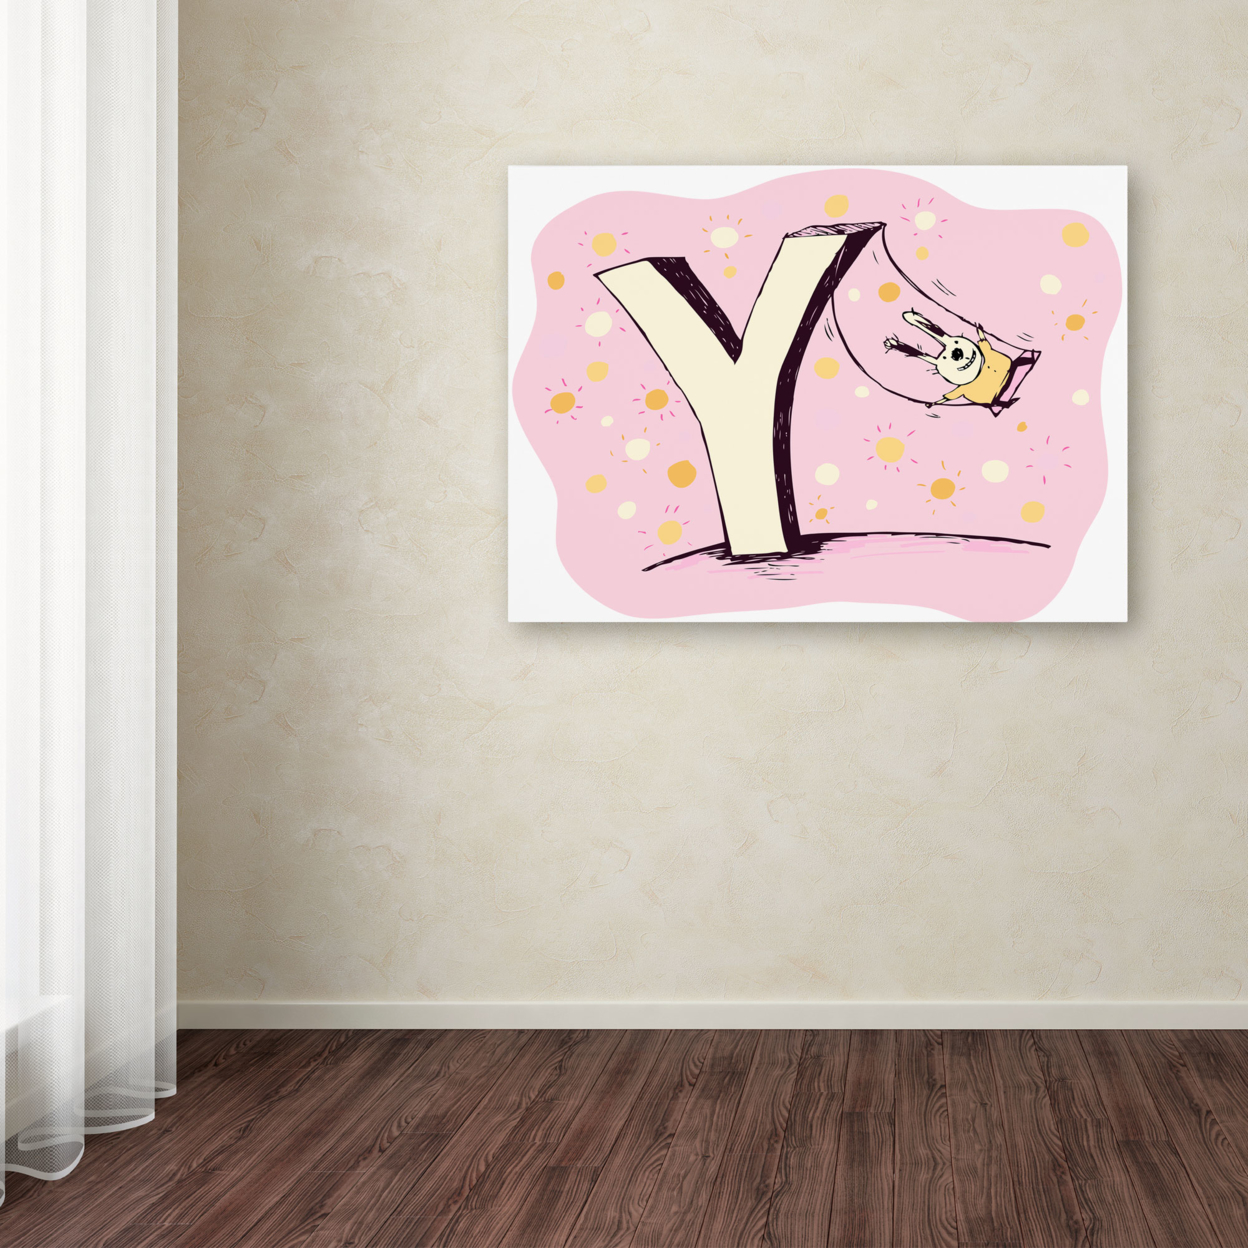 Carla Martell 'Bunny On Swing' Canvas Wall Art 35 X 47 Inches